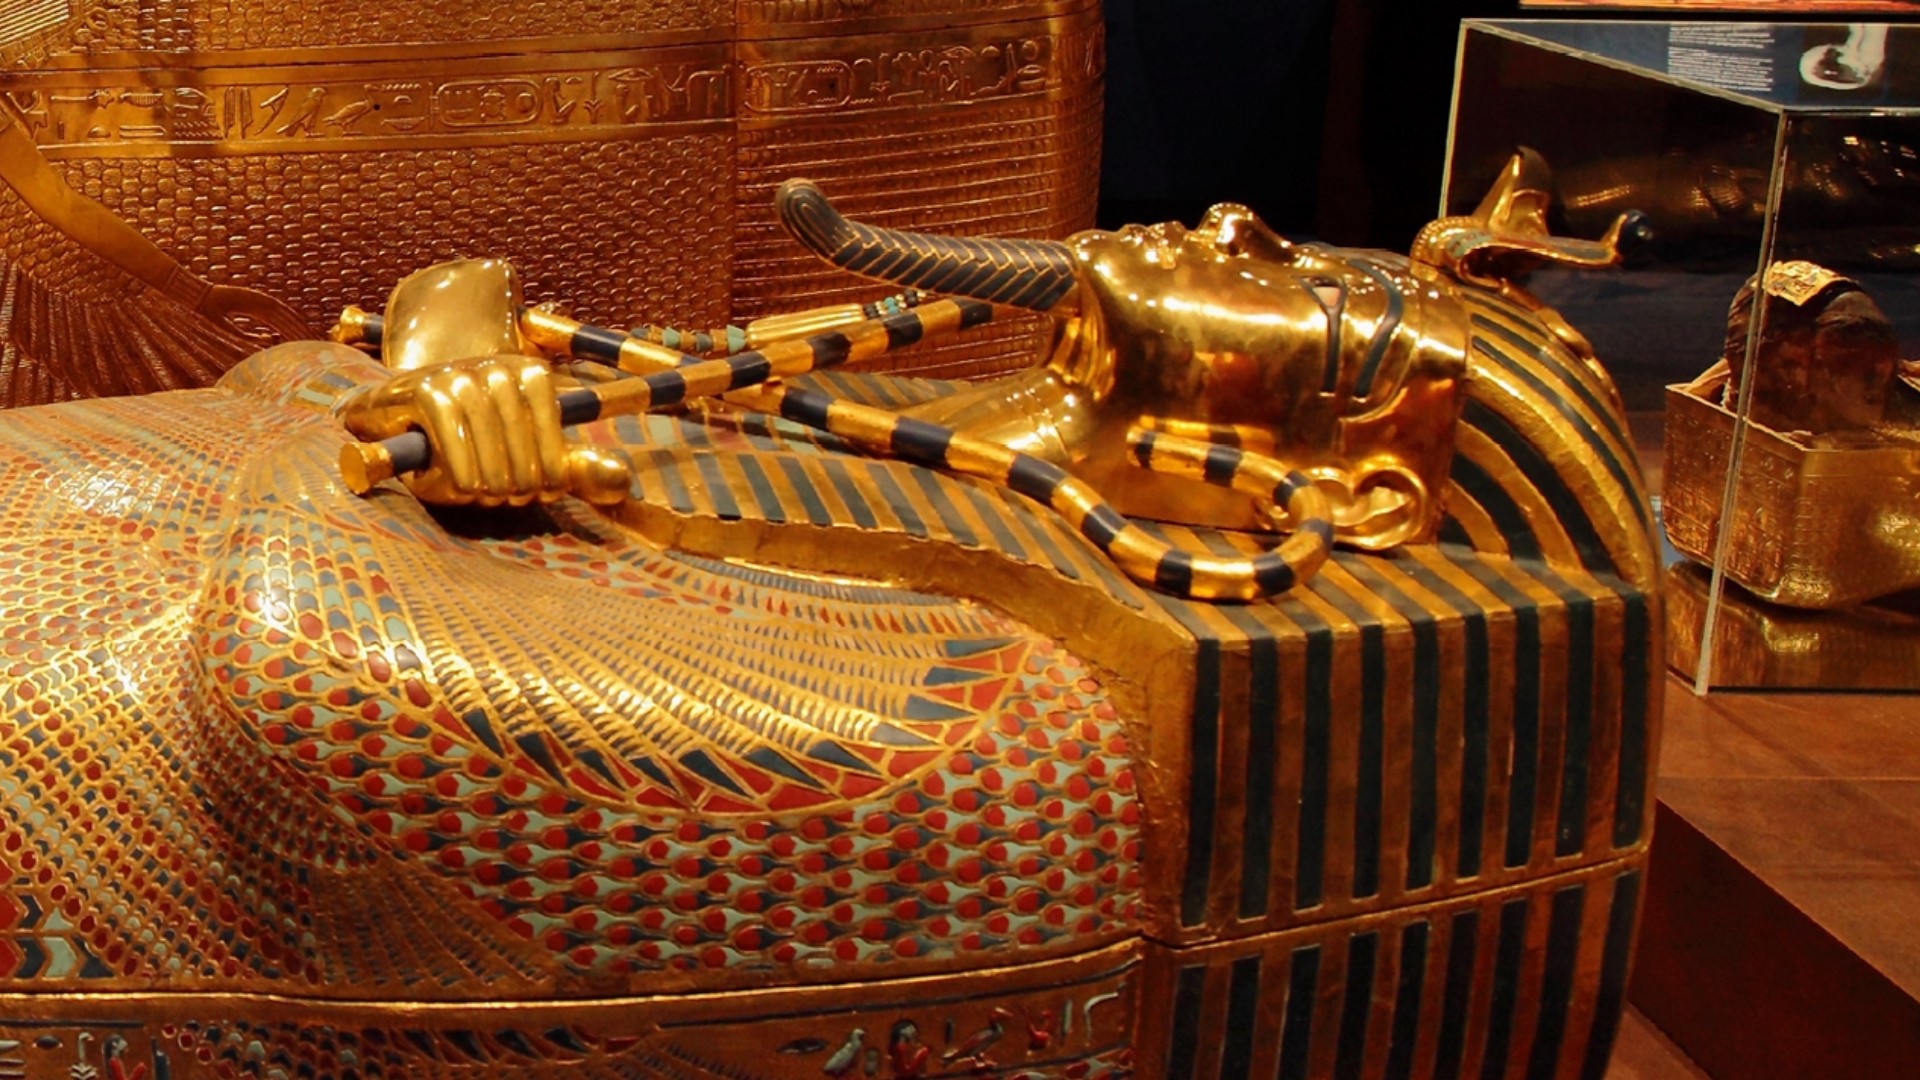 "Tutankhamun: His Tomb and his Treasures" will open at the Columbus science museum on March 18, 2023.